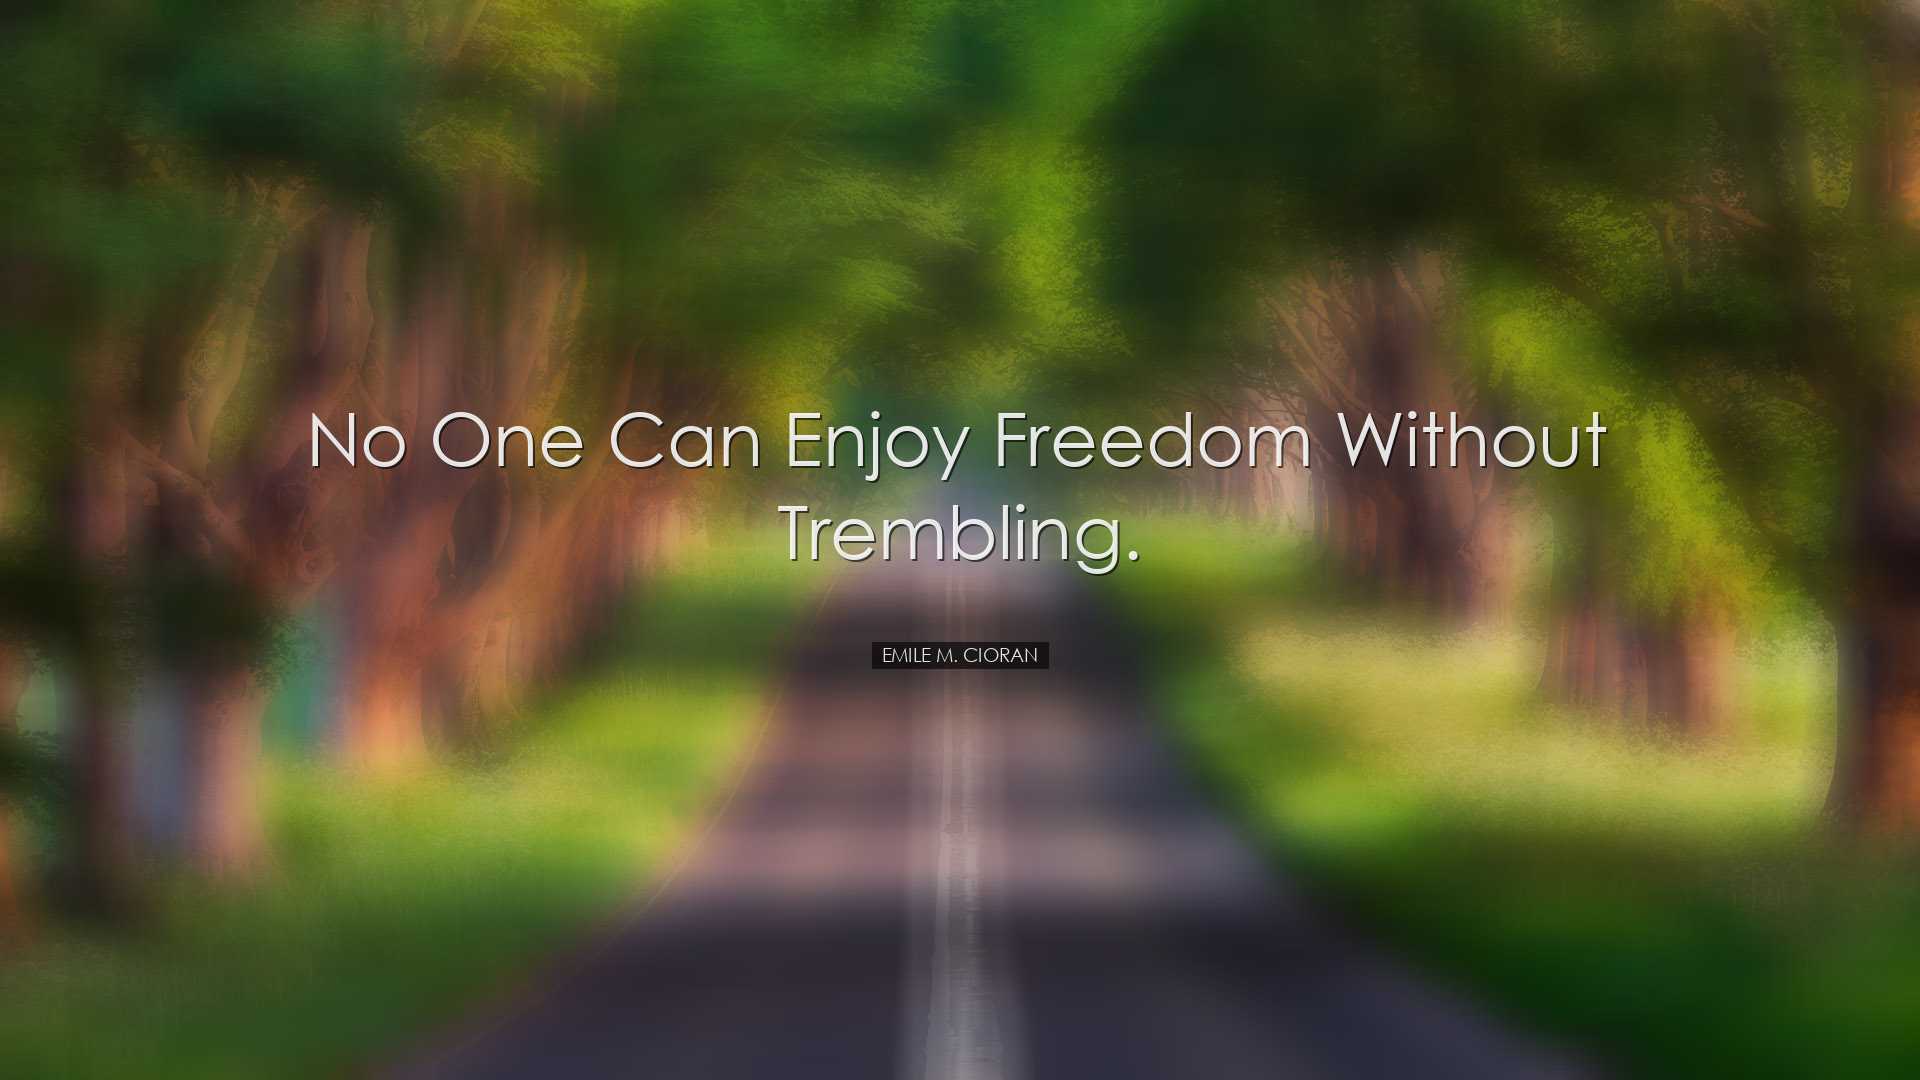 No one can enjoy freedom without trembling. - Emile M. Cioran